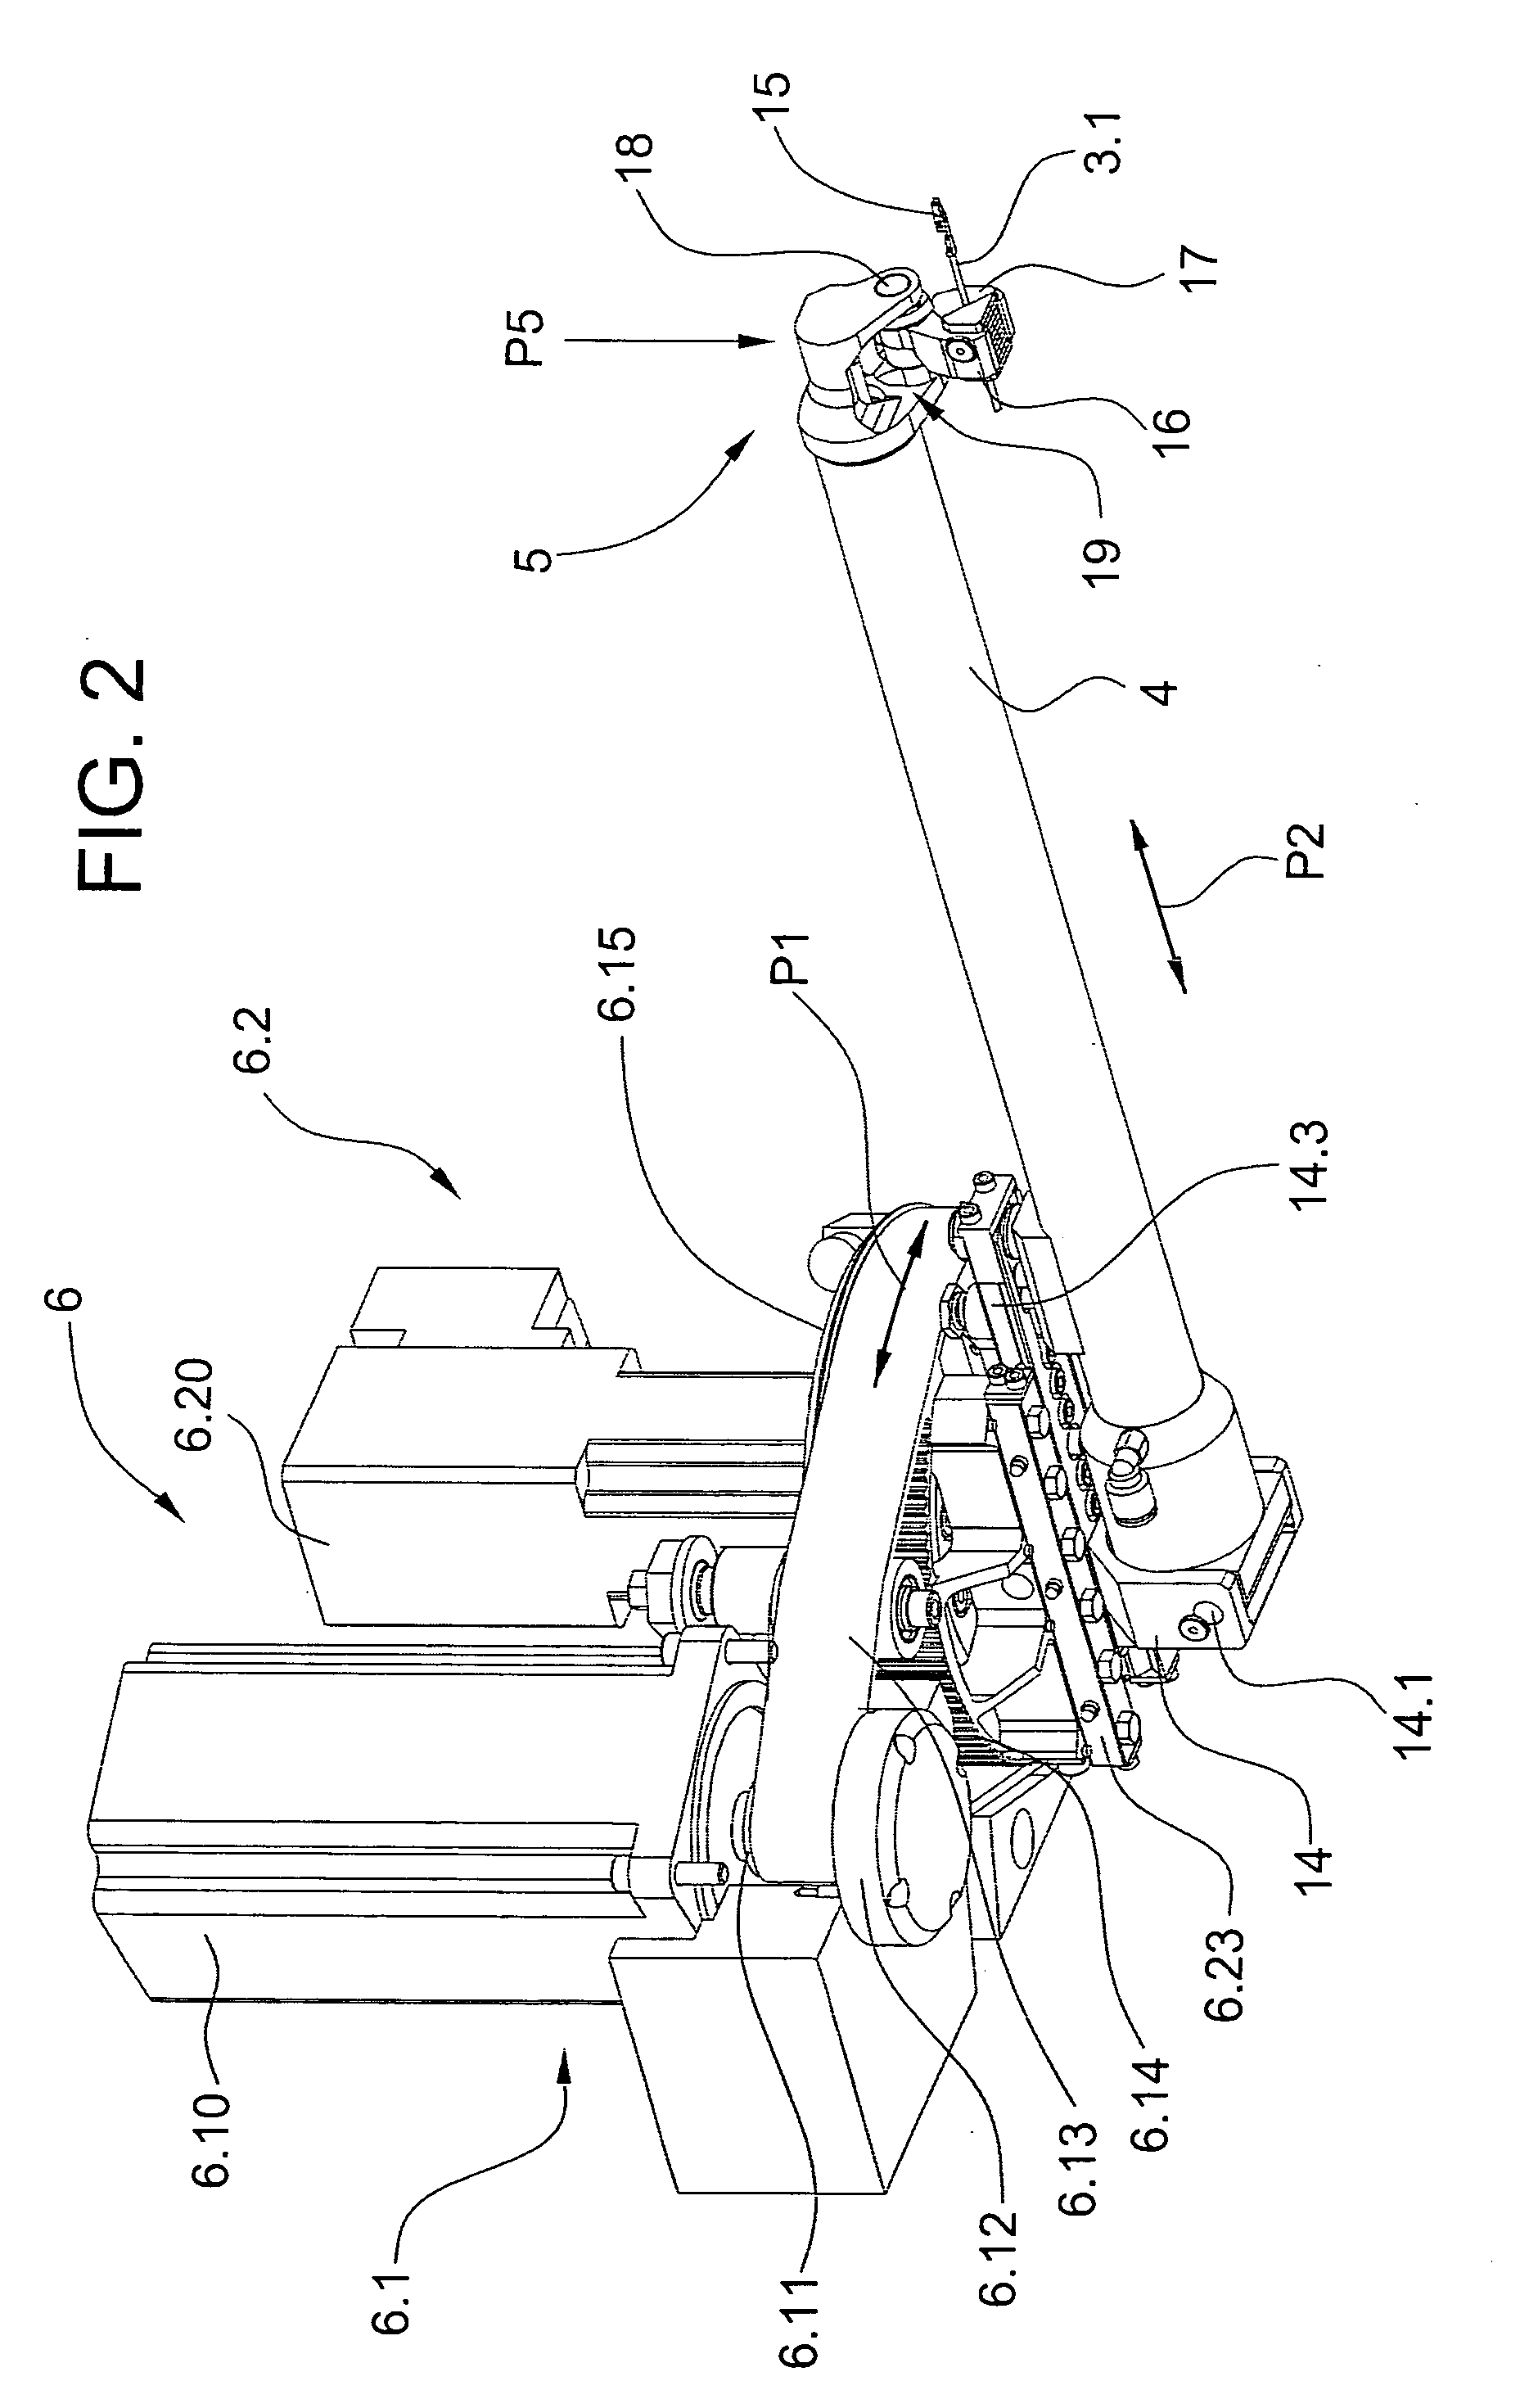 Inspection apparatus and method for wire-processing machine